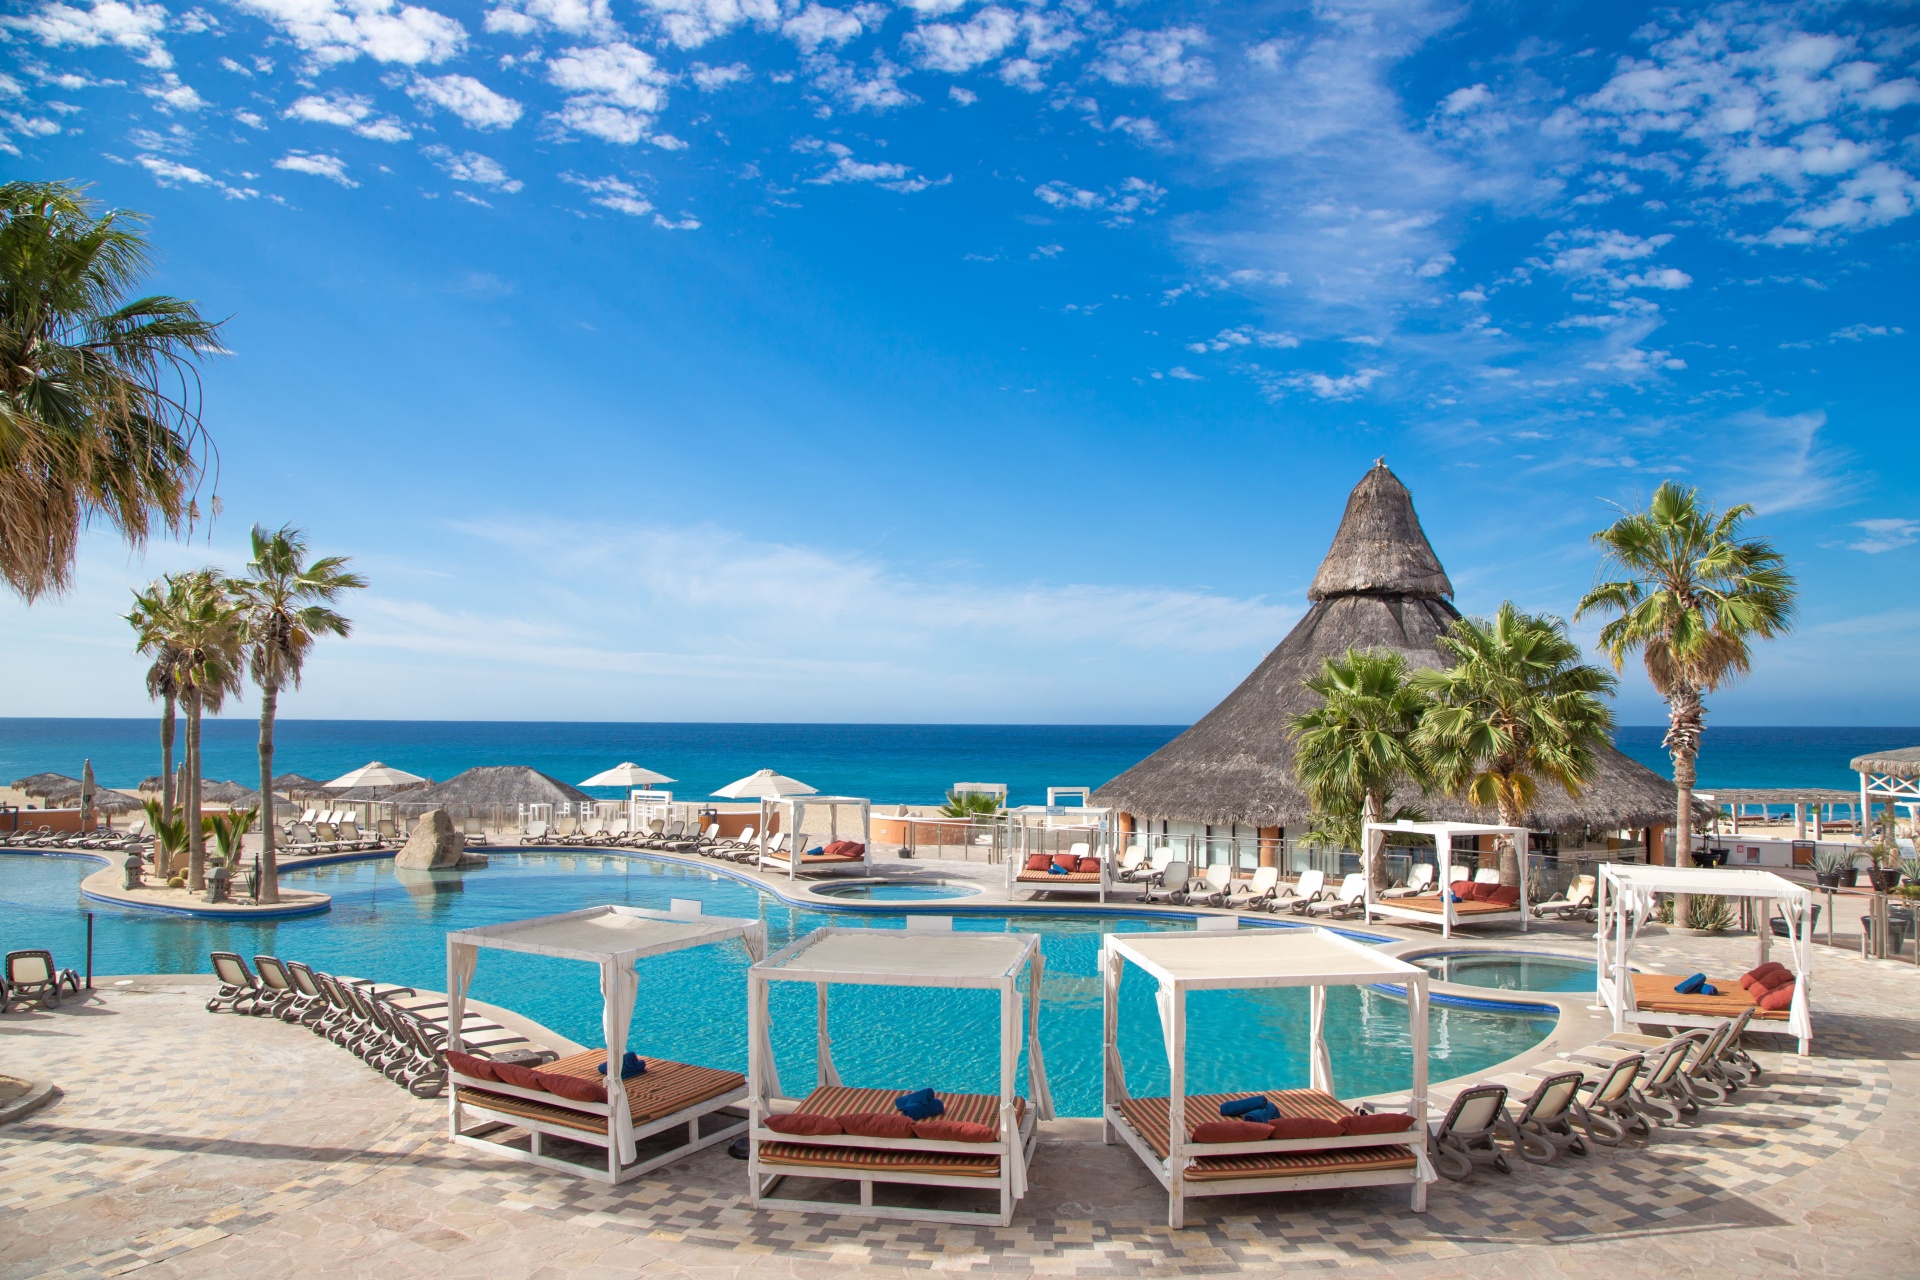 Sandos Resorts All Inclusive Resorts in Spain & Mexico